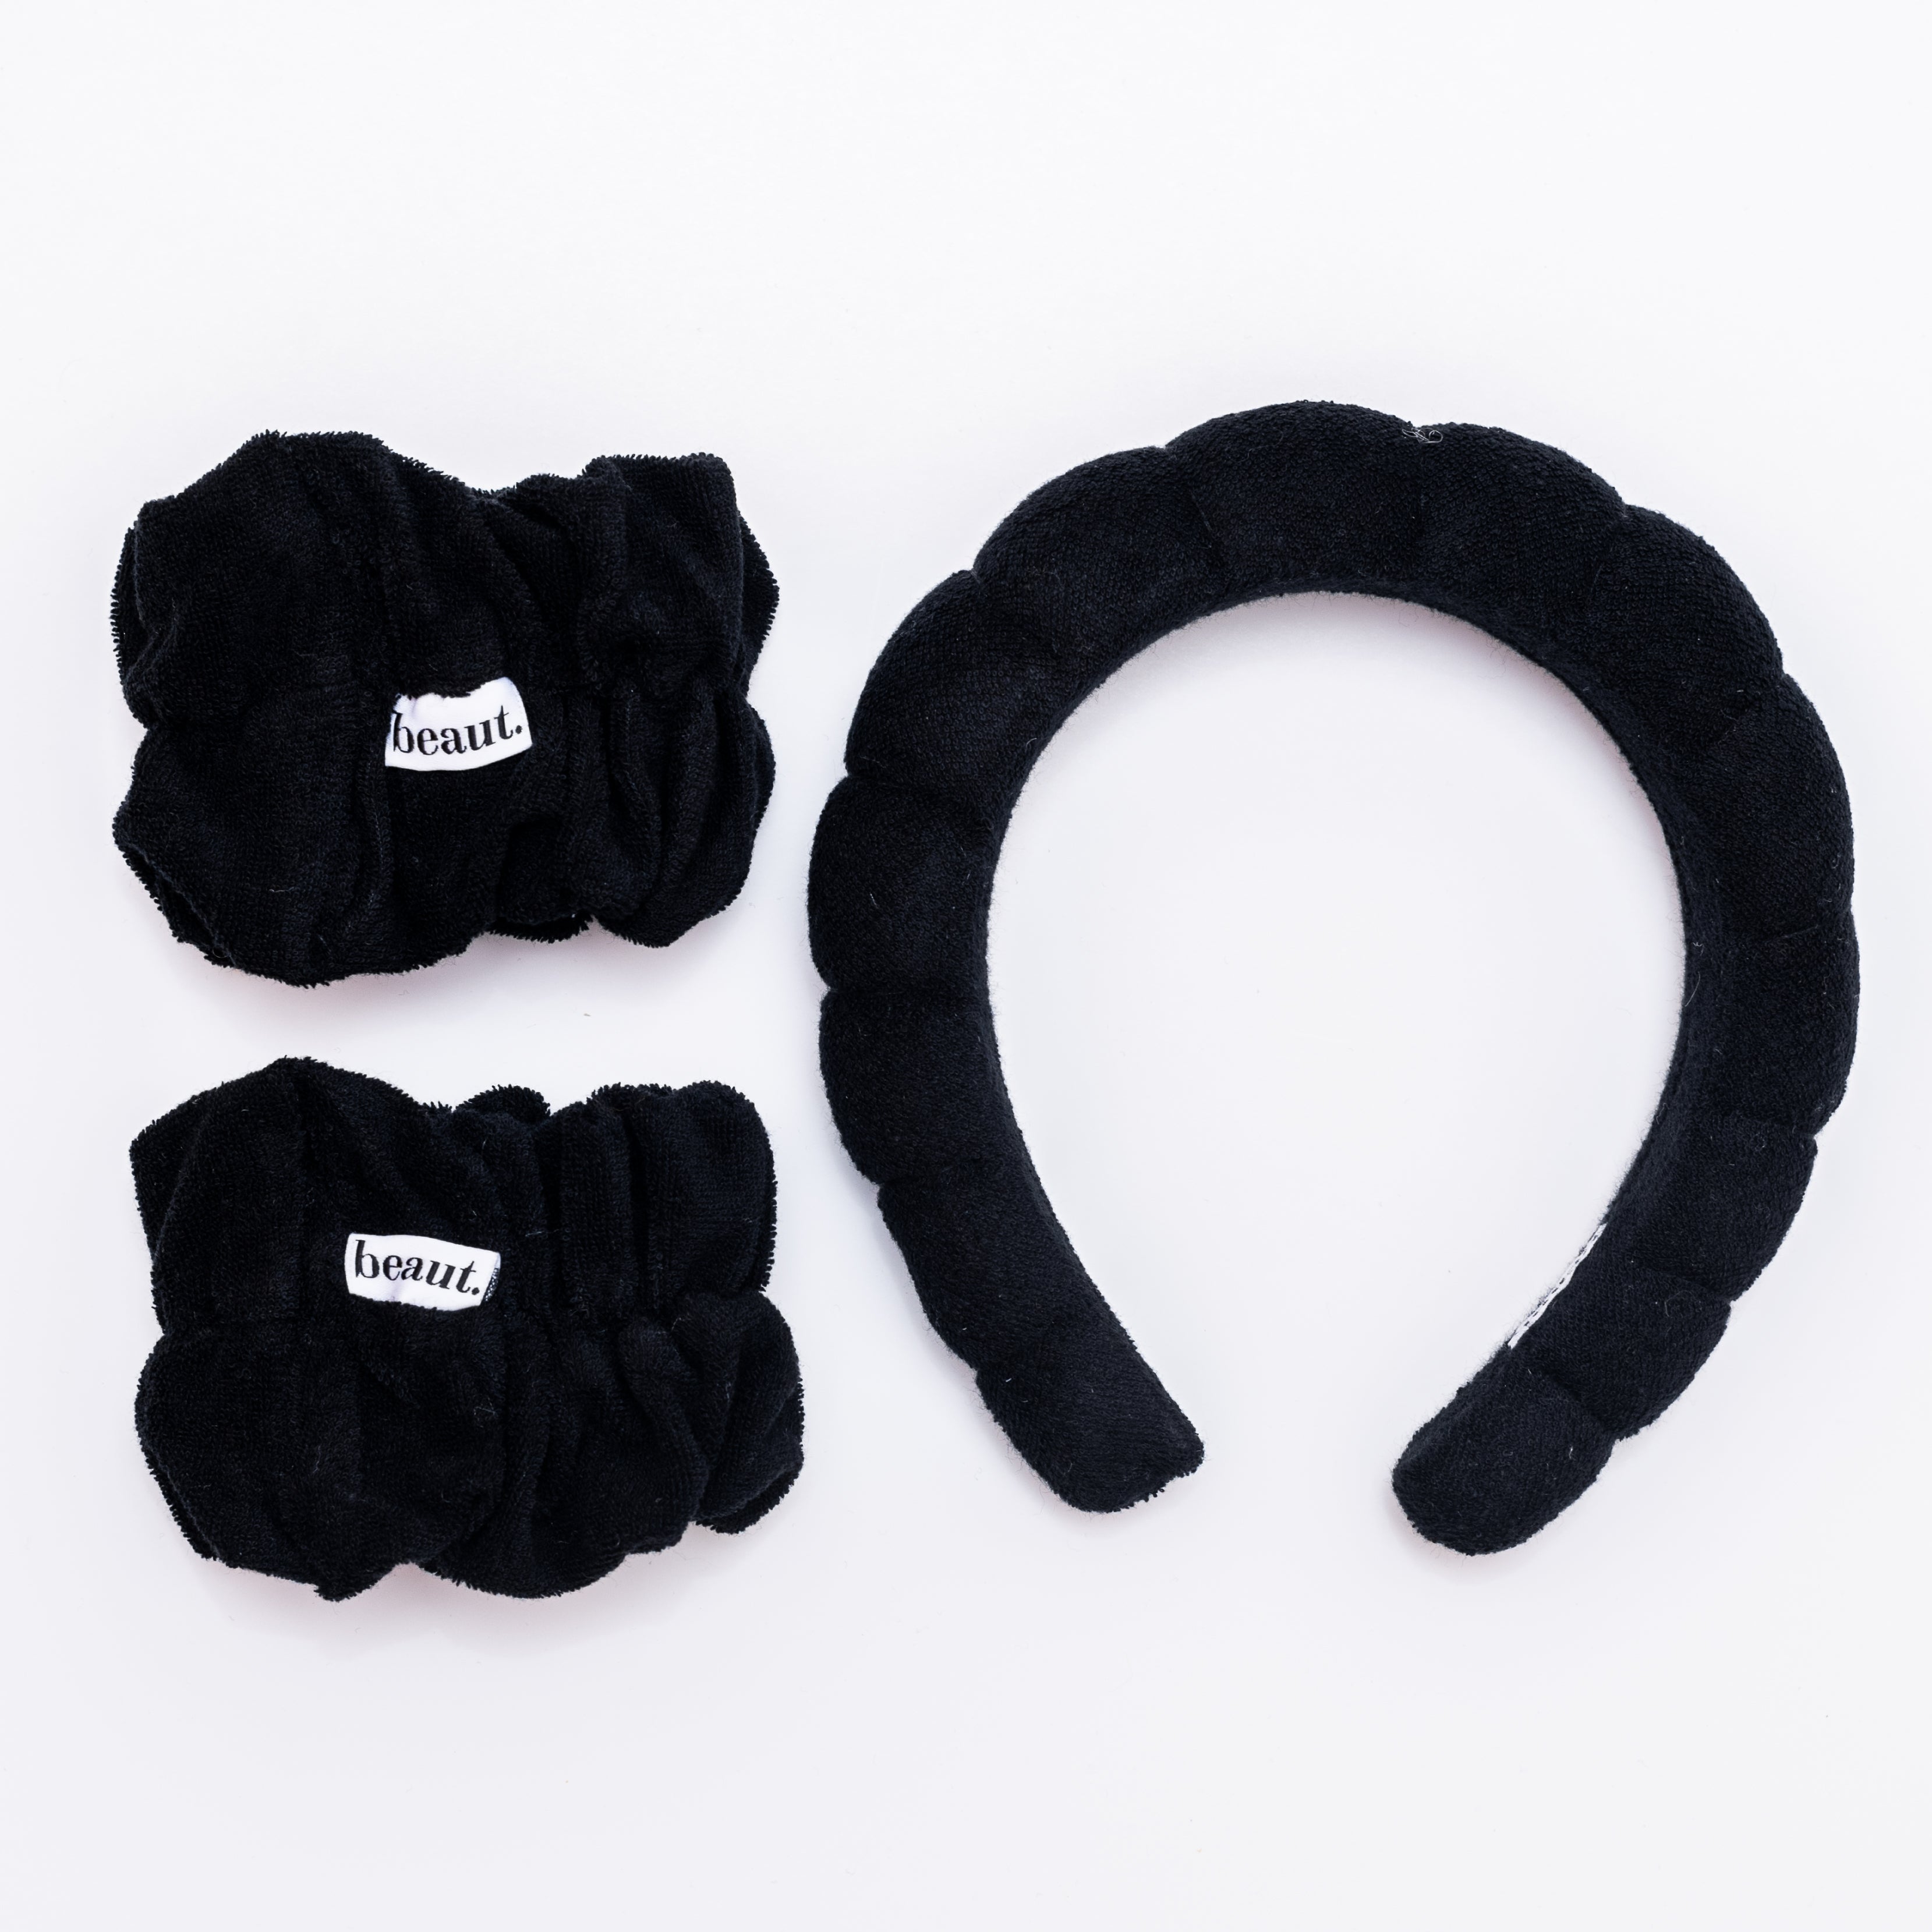 Market Live Preorder: bubble headband + wristbands set by beaut. (Ships in 2-3 Weeks)